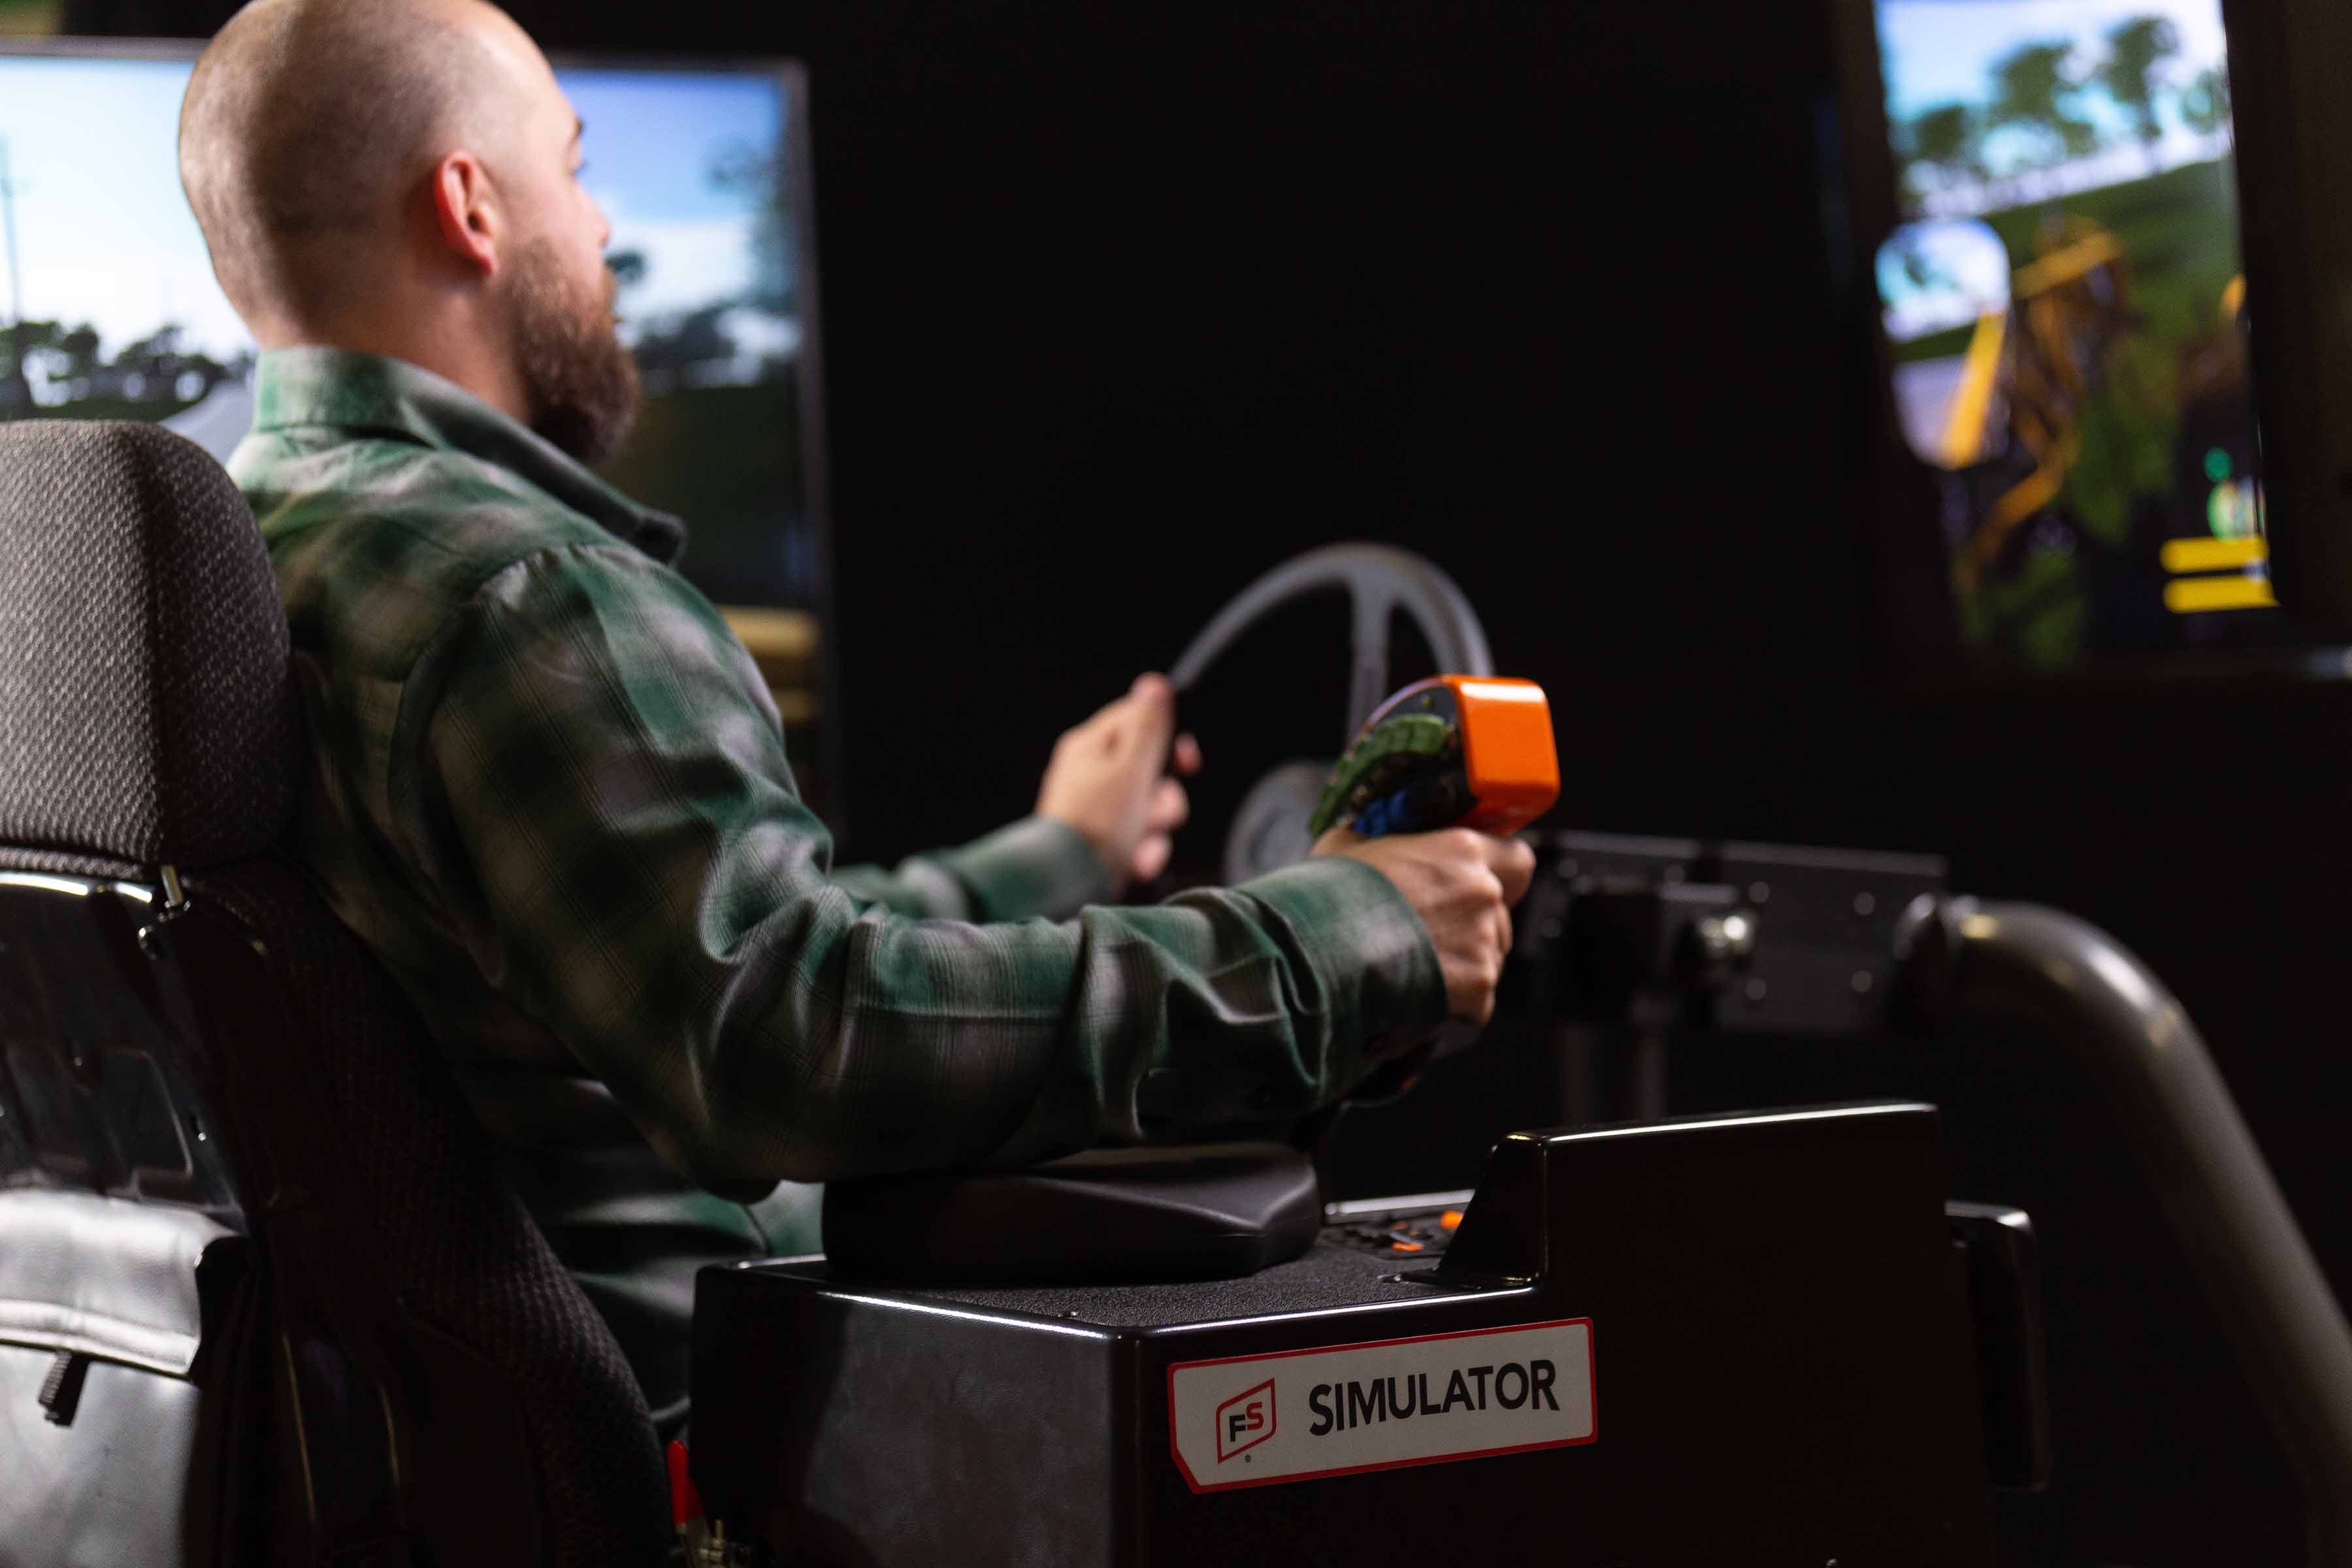 Training on GROWMARK’s FS Simulator™, students learn how to safely drive on roads and efficiently operate an ag sprayer in row crops.